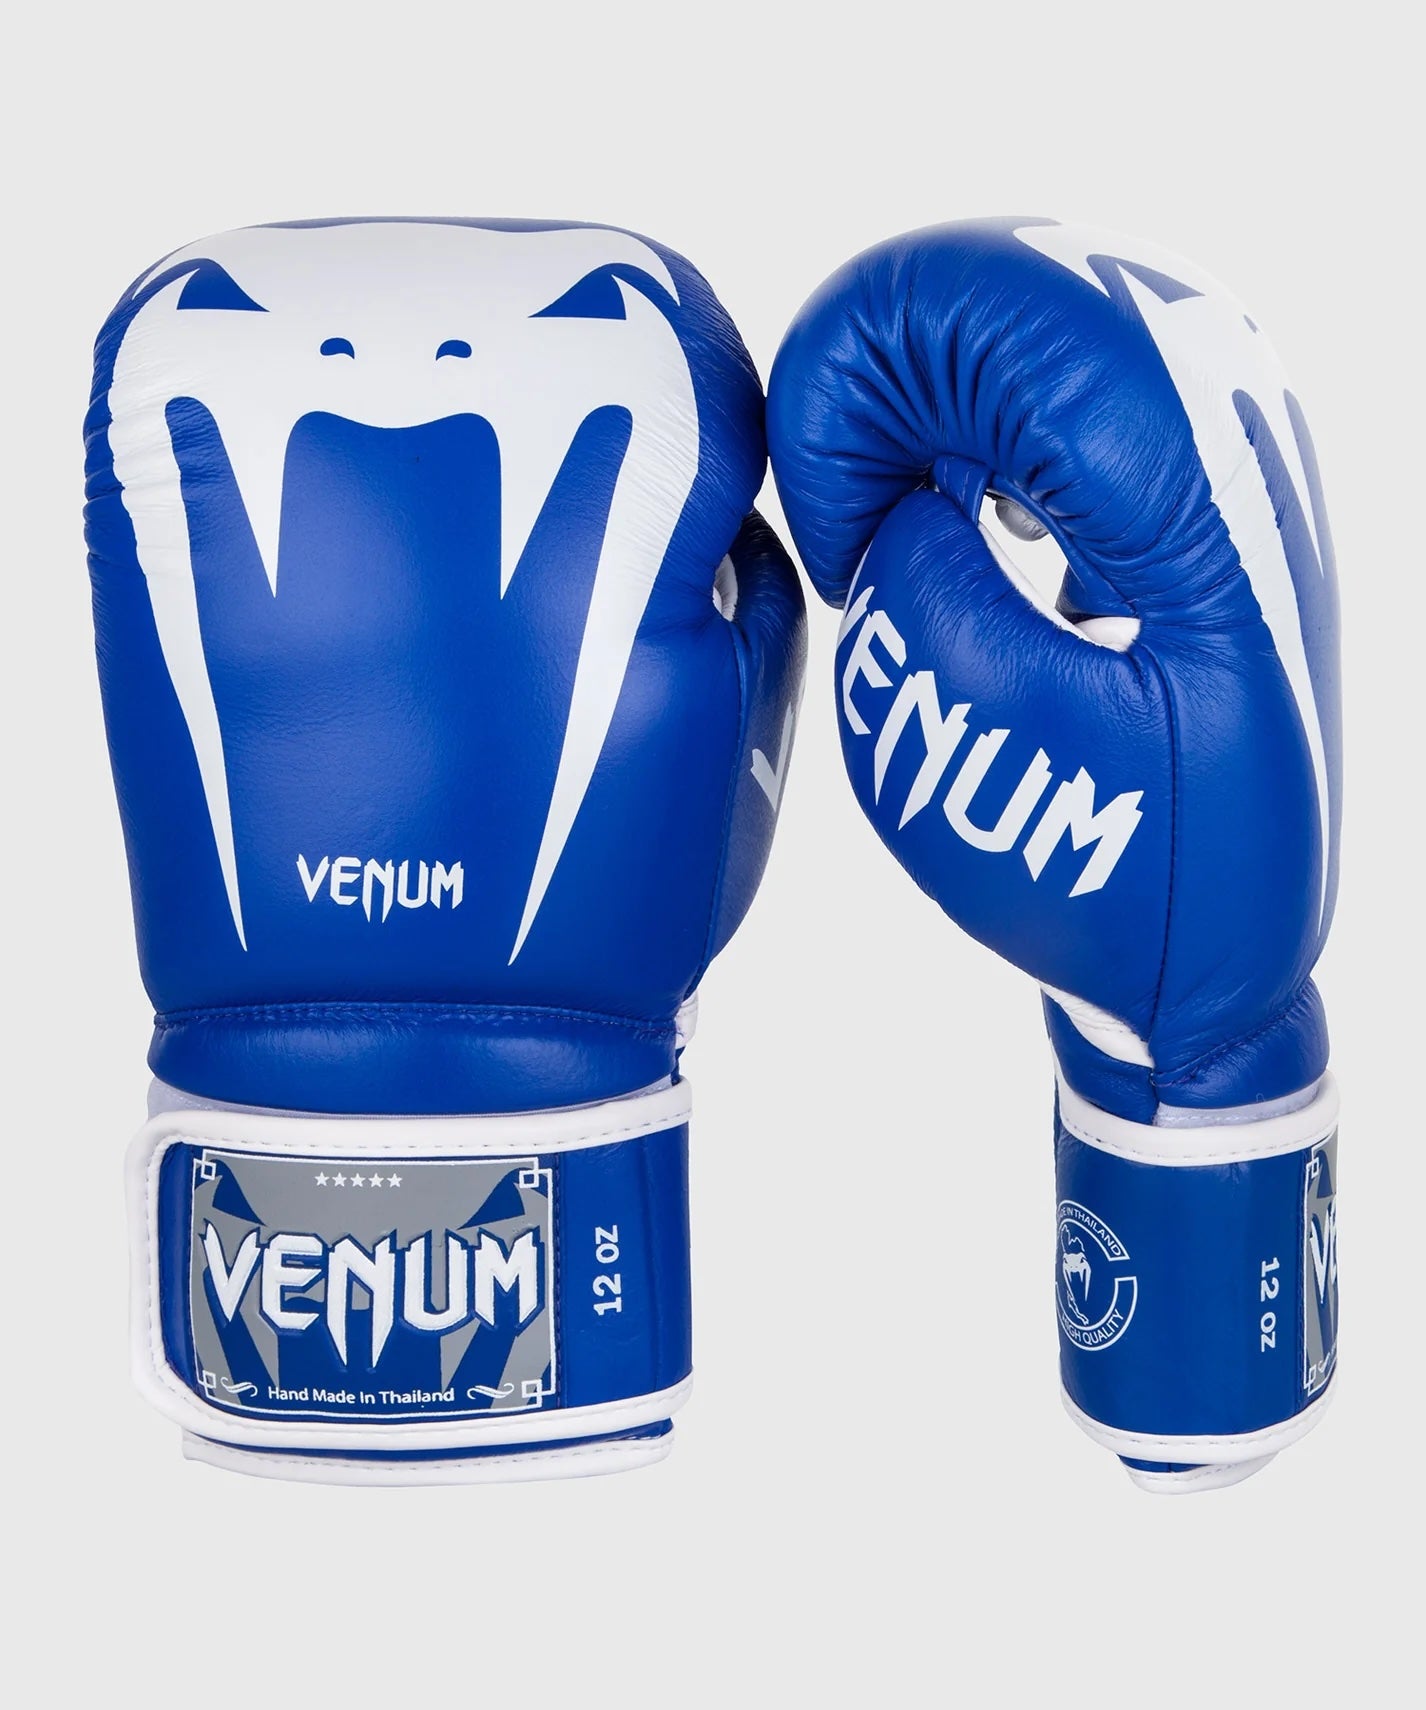 Giant 3.0 Boxing Gloves (Nappa Leather) - Blue